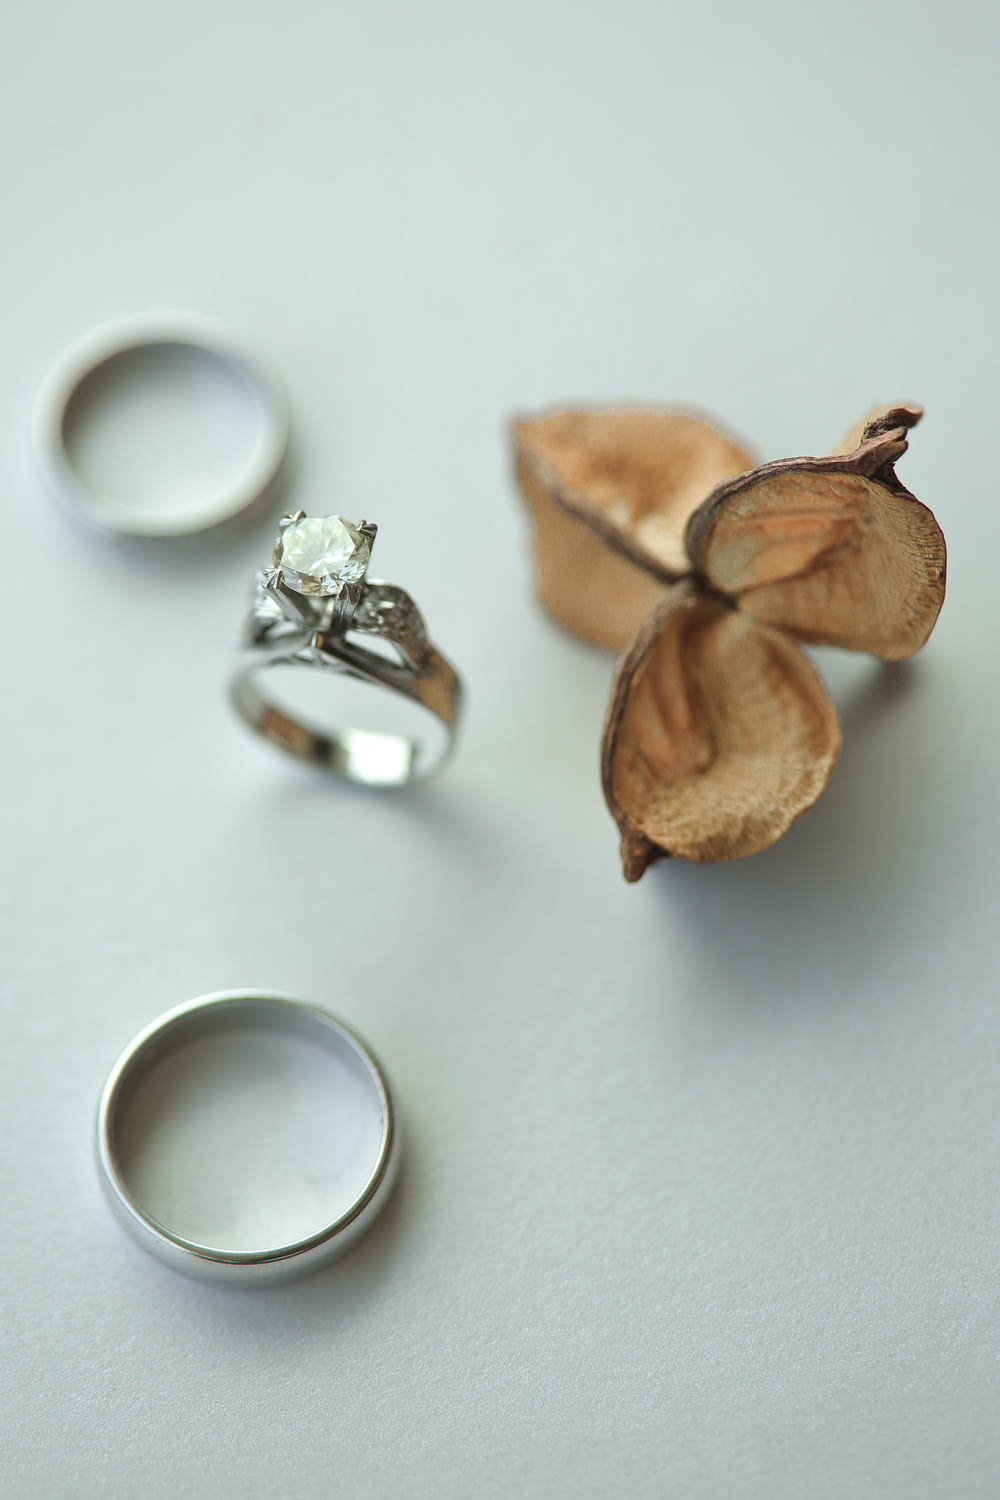 silver ring beside brown nuts